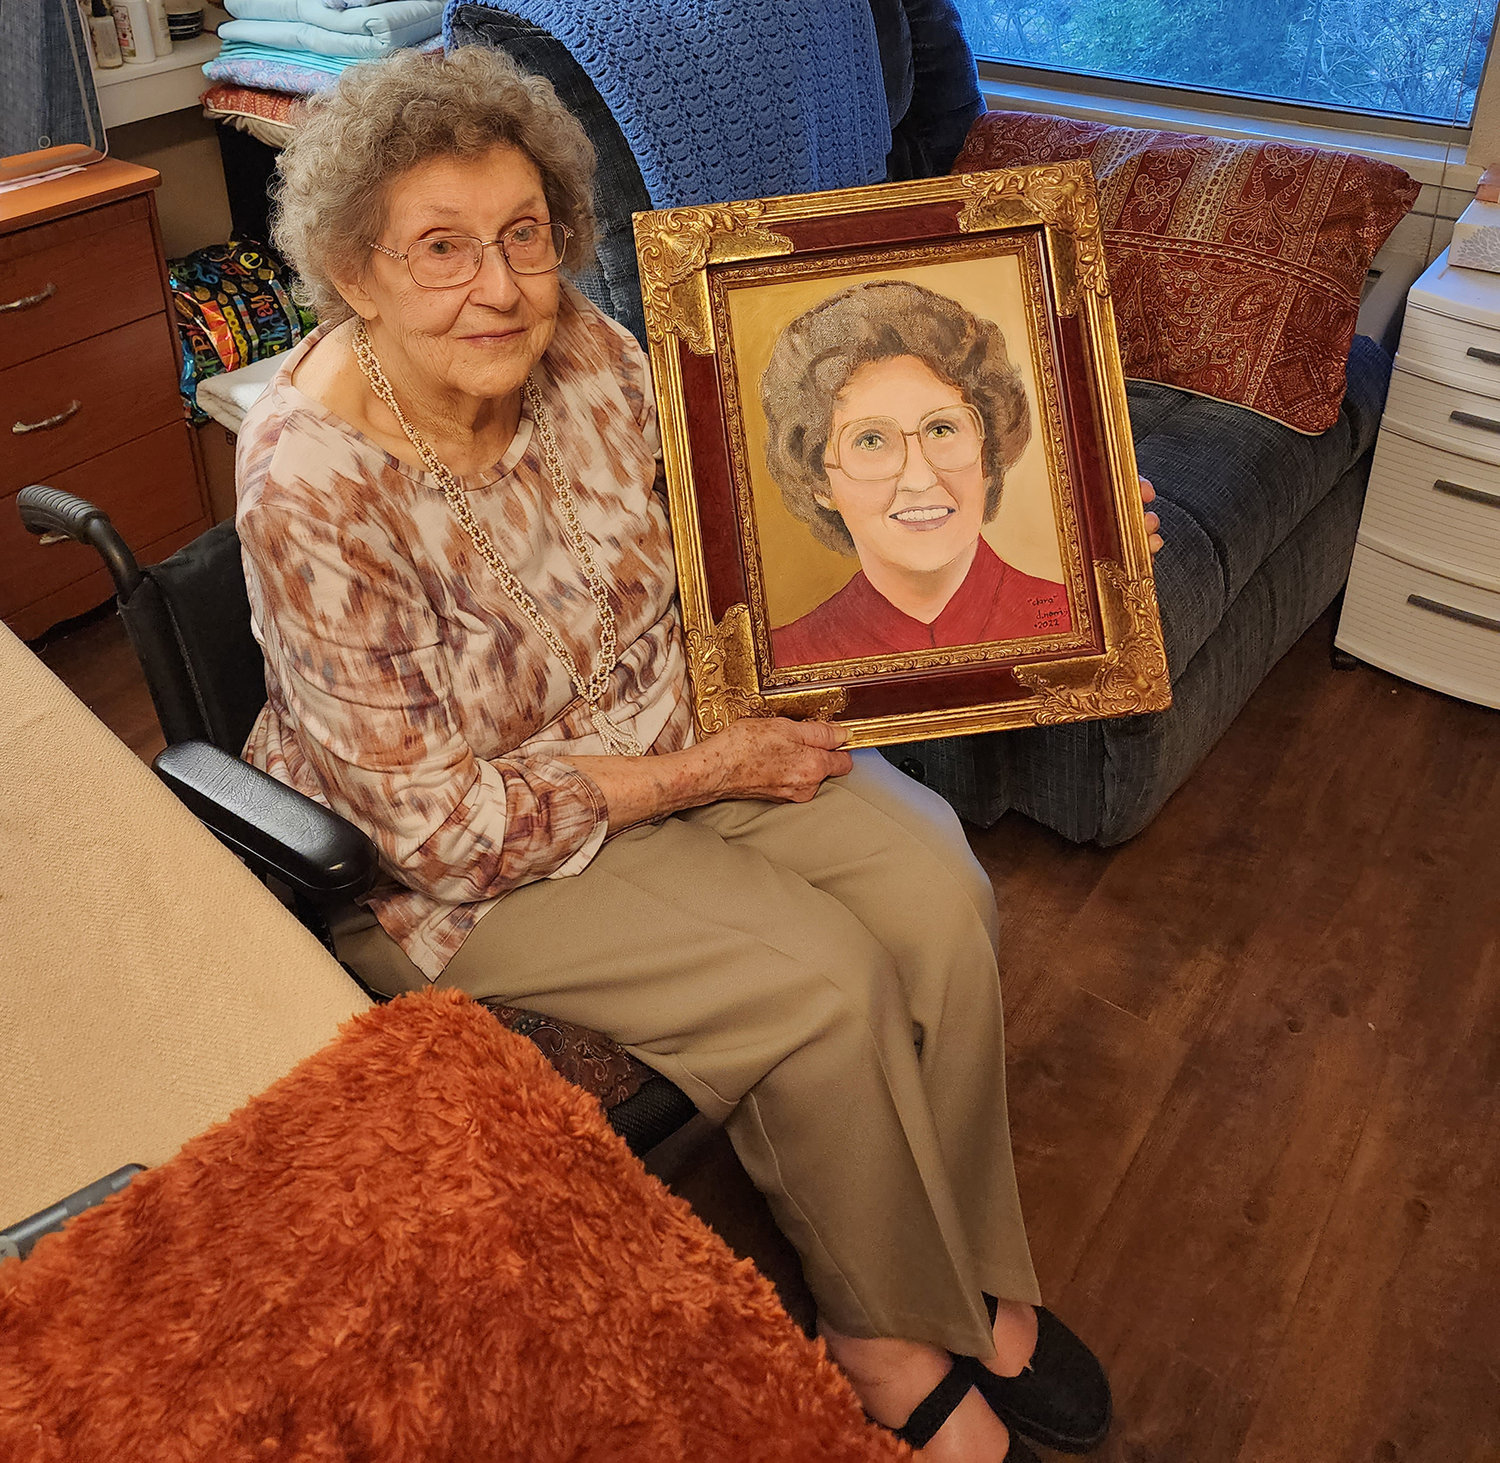 Clara Whisenant holds a painting of herself in her younger days created by an old friend, Daniel Norris. He worked for she and her husband Ray when they owned the Mobile station near downtown Aledo and it was a present for her recent 100th birthday.